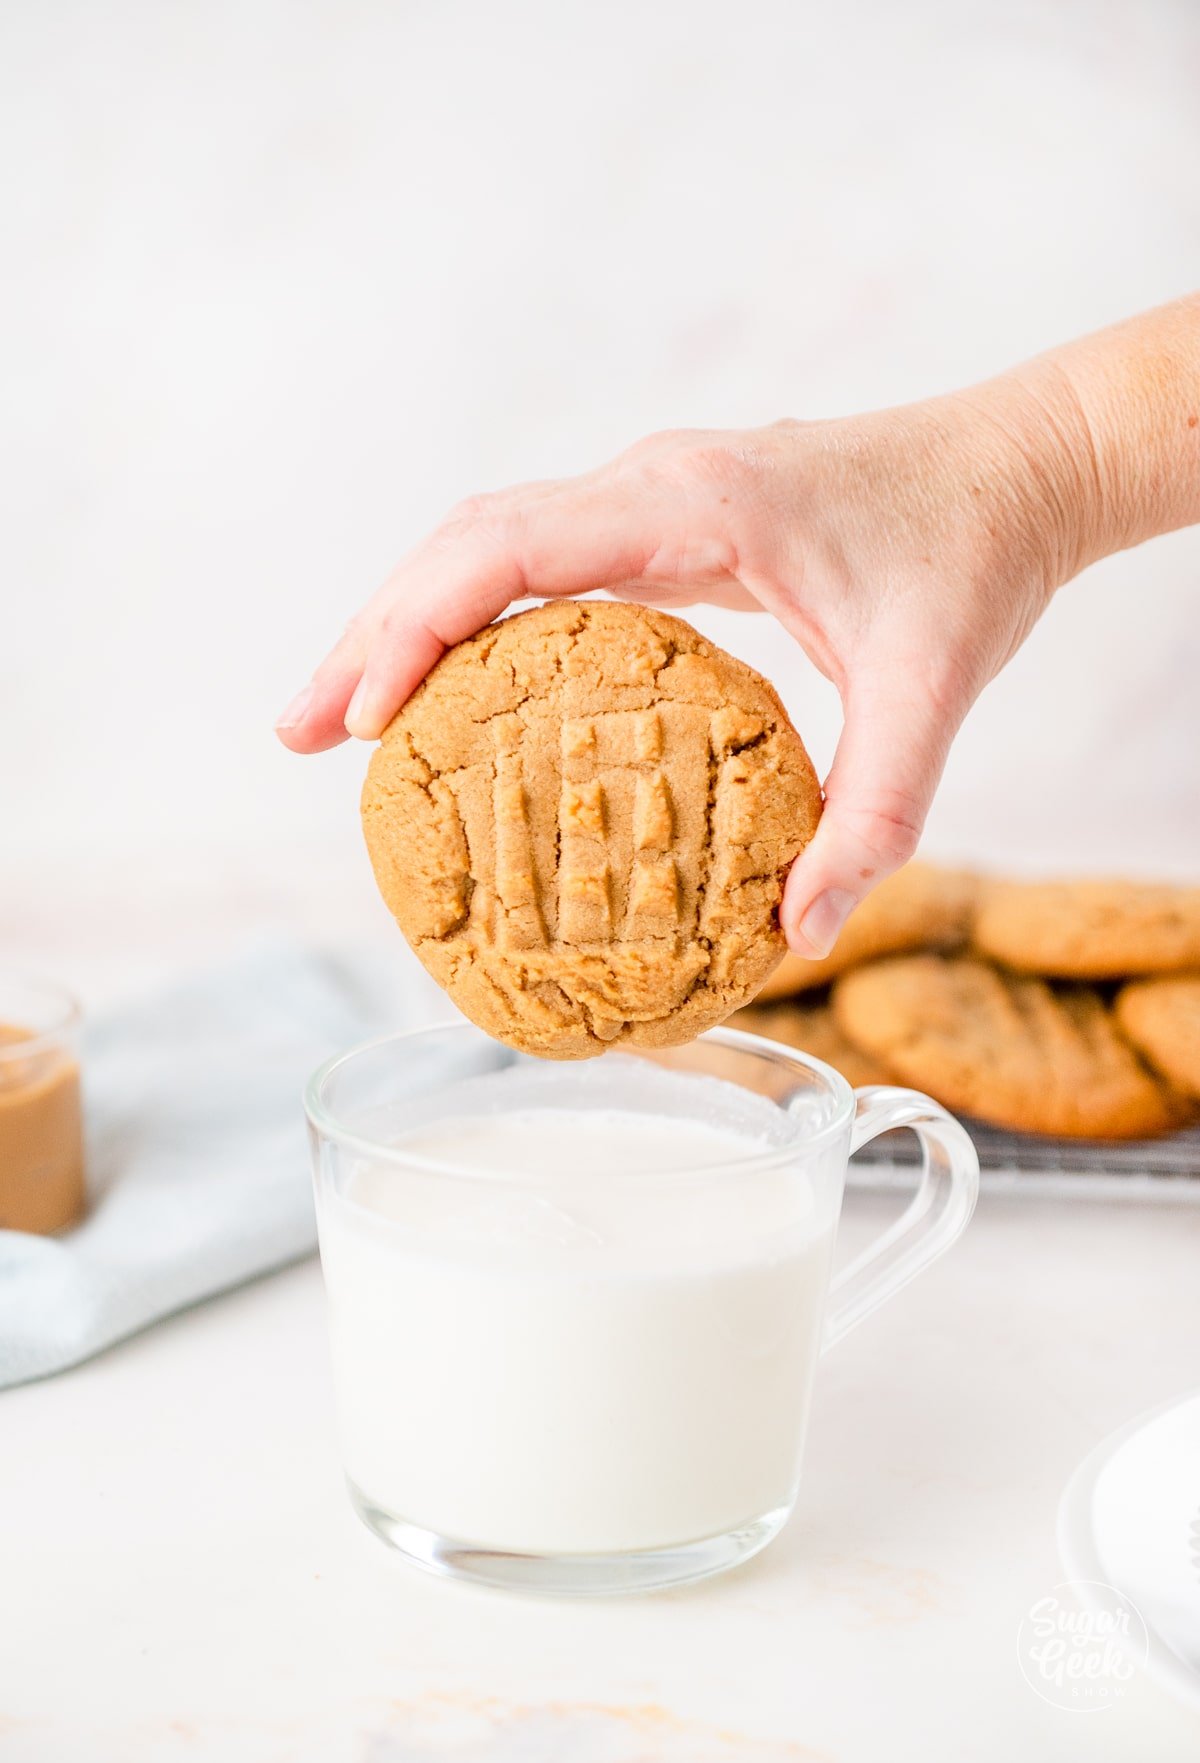 hand holding a large peanut butter cookie over a glass of milk